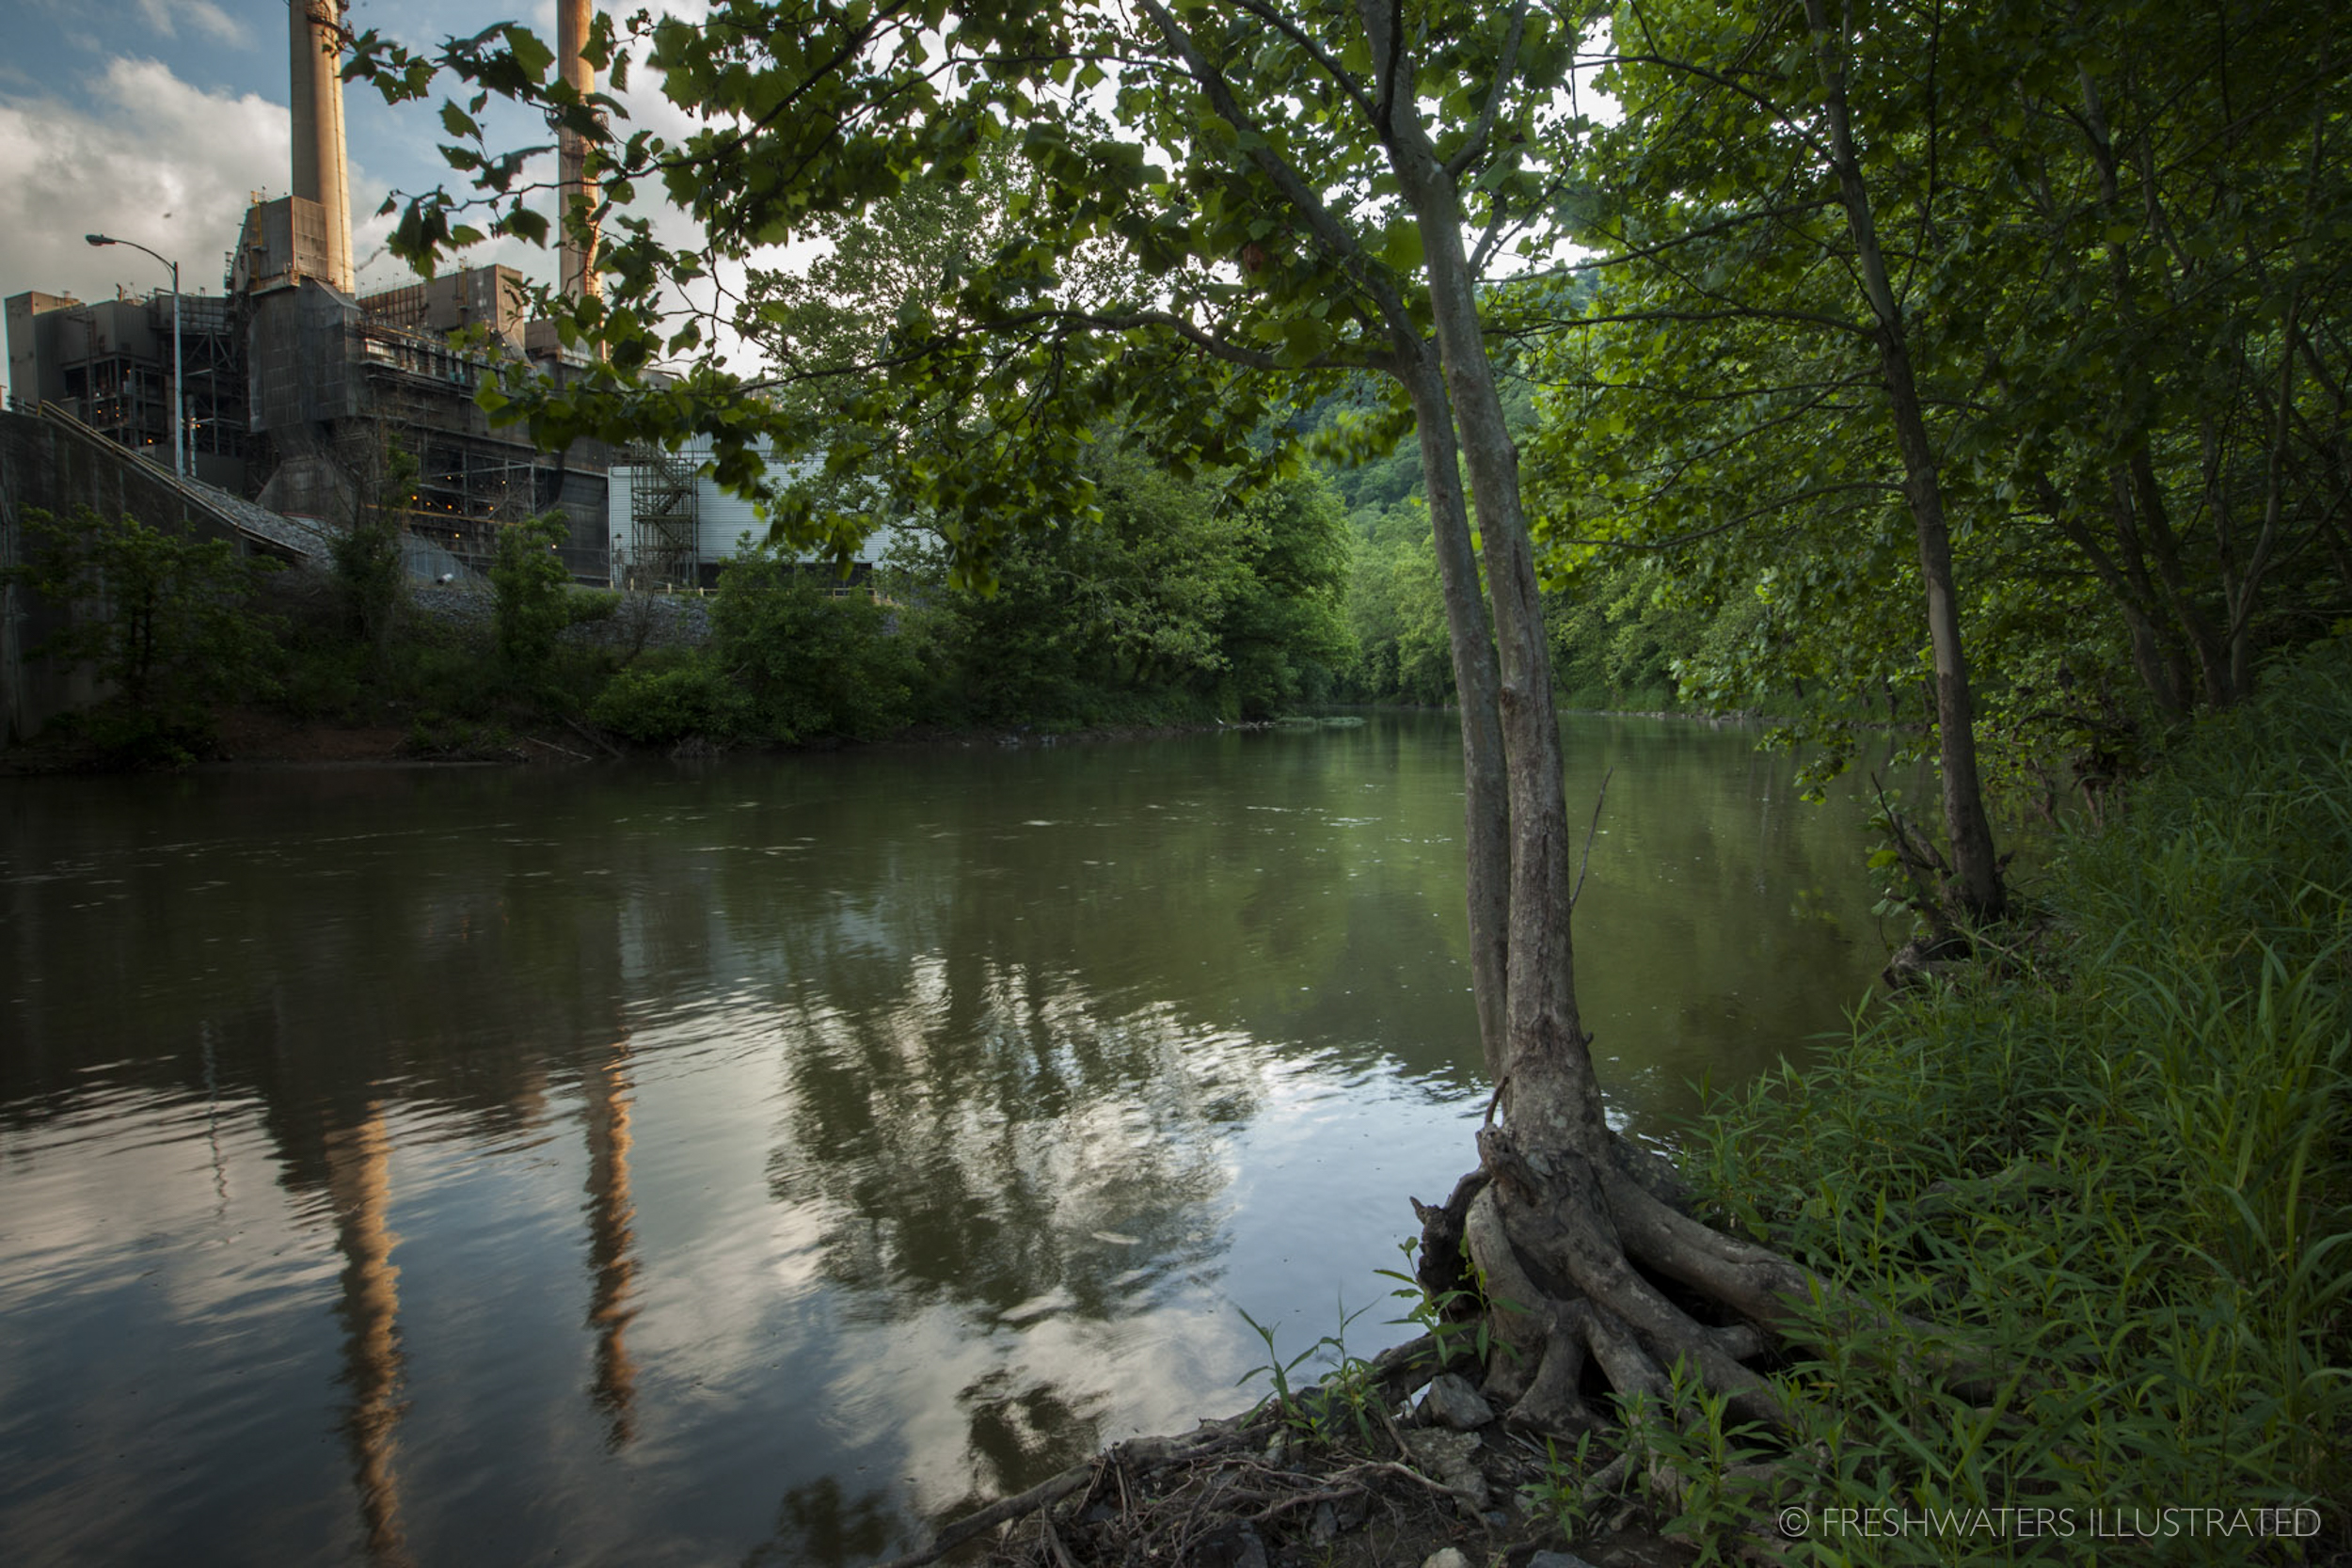  Located right on the banks of the Clinch River, the Carbo powerplant has been identified as causing water quality problems from the storage of coal ash. Located upstream from crucial freshwater mussel beds, a spill from this plant could result in th